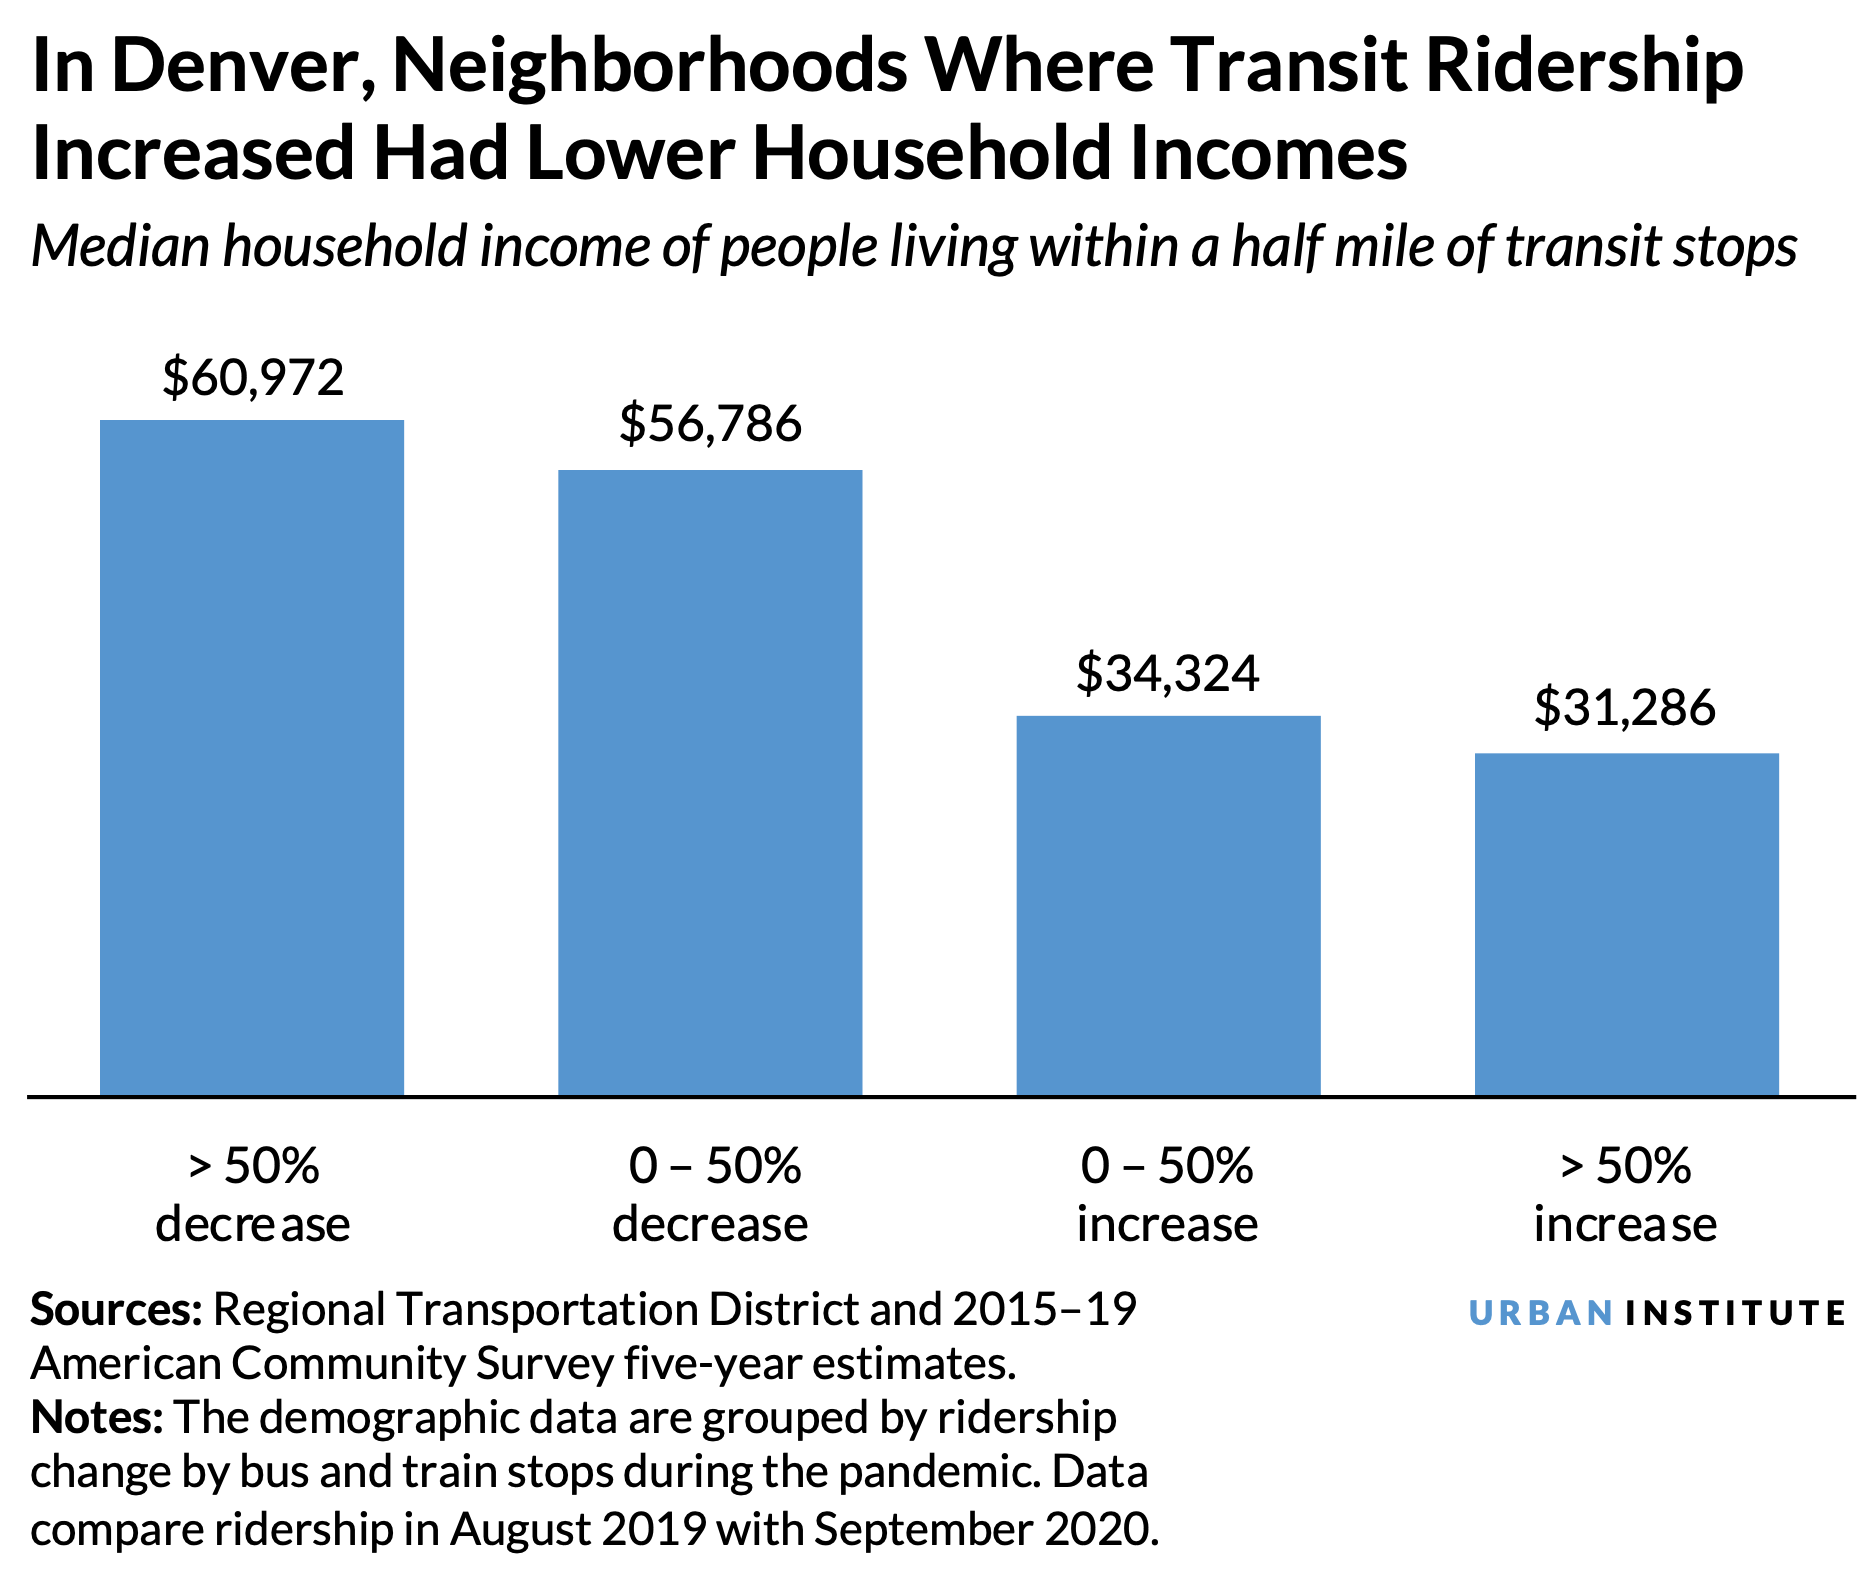 Bar chart showing that in Denver, neighborhoods where transit ridership increased during the pandemic had lower household incomes